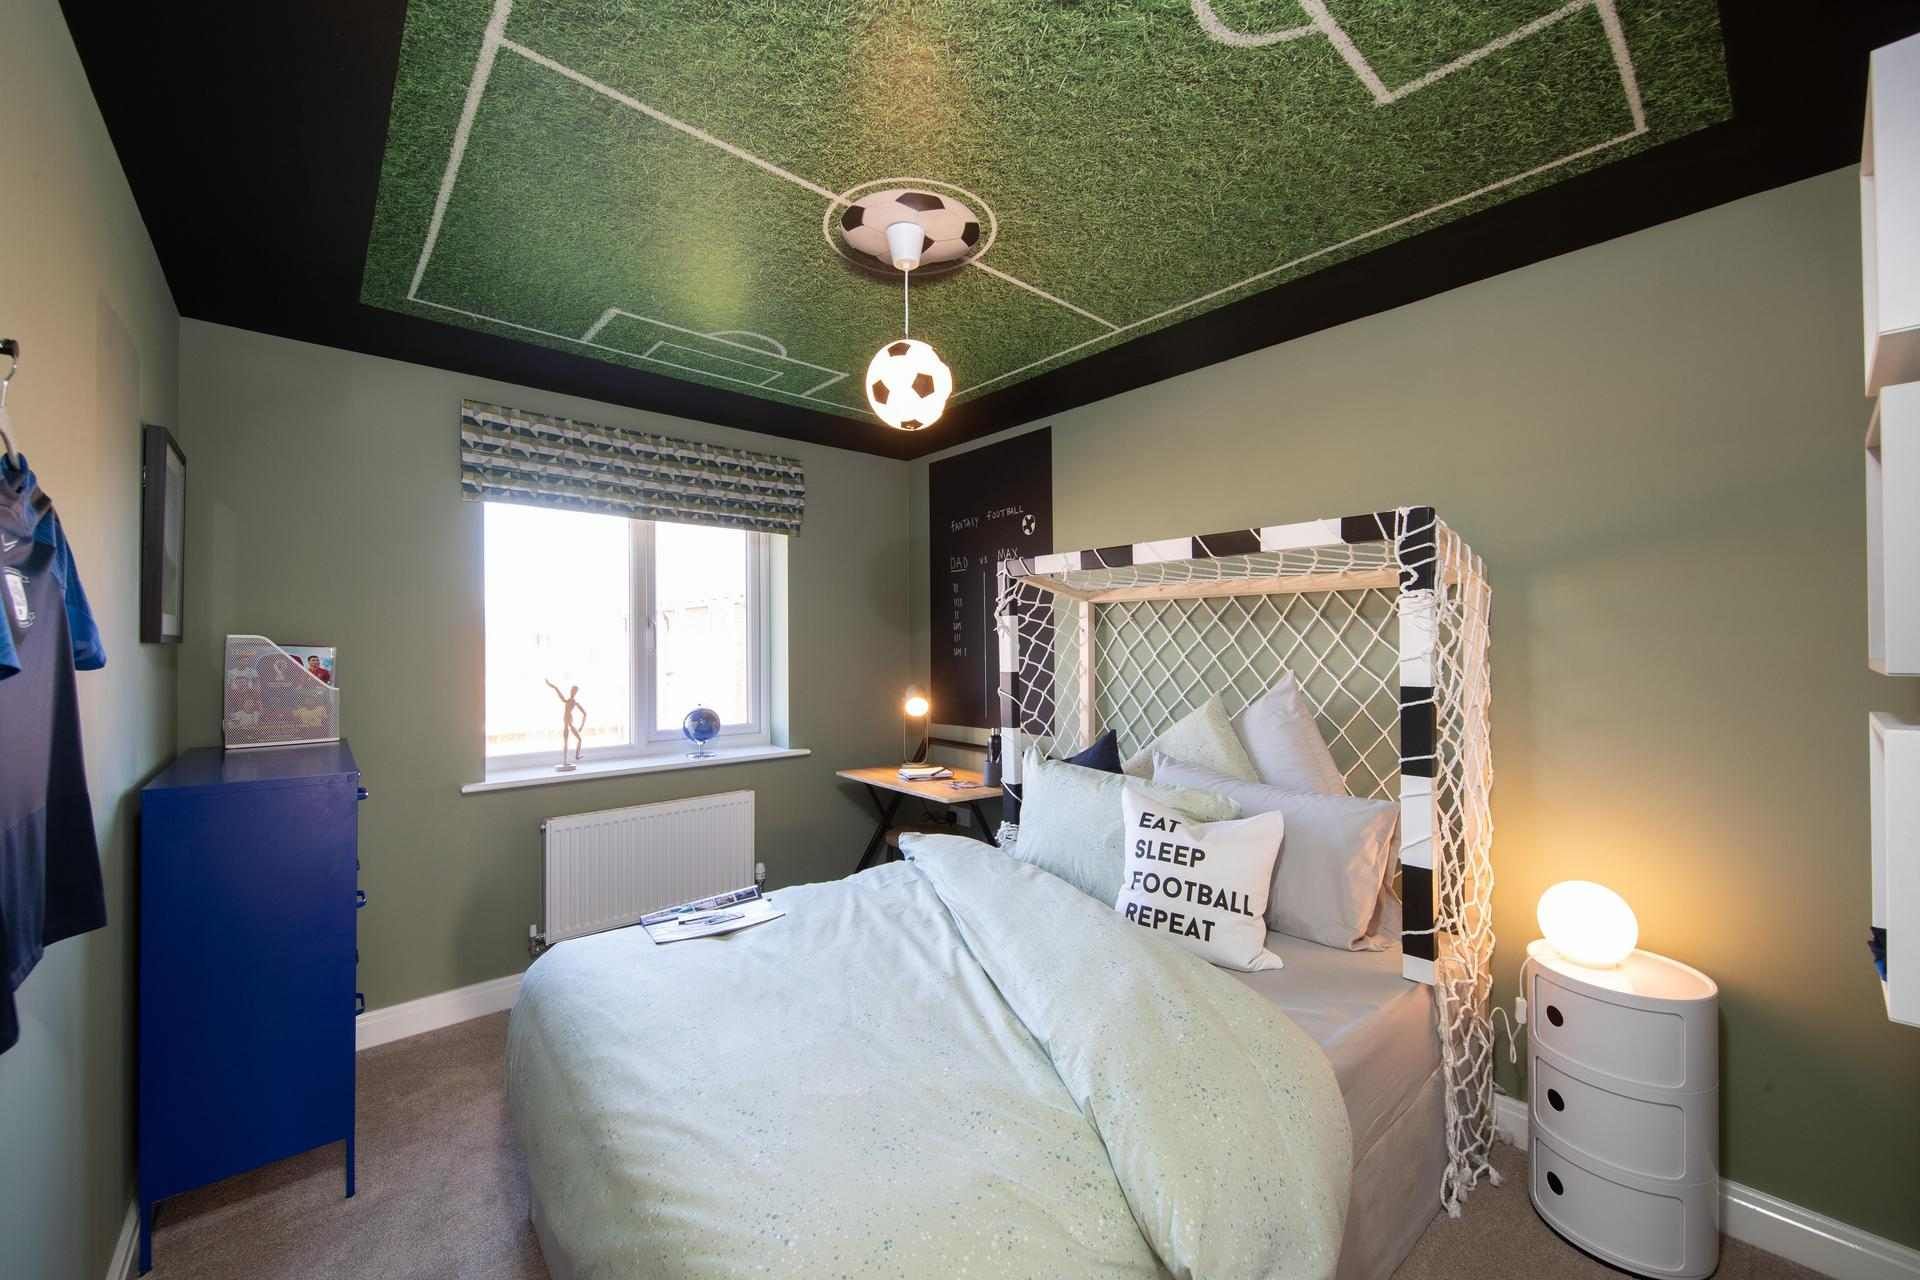 11 Ideas for Decorating a Boy's Bedroom